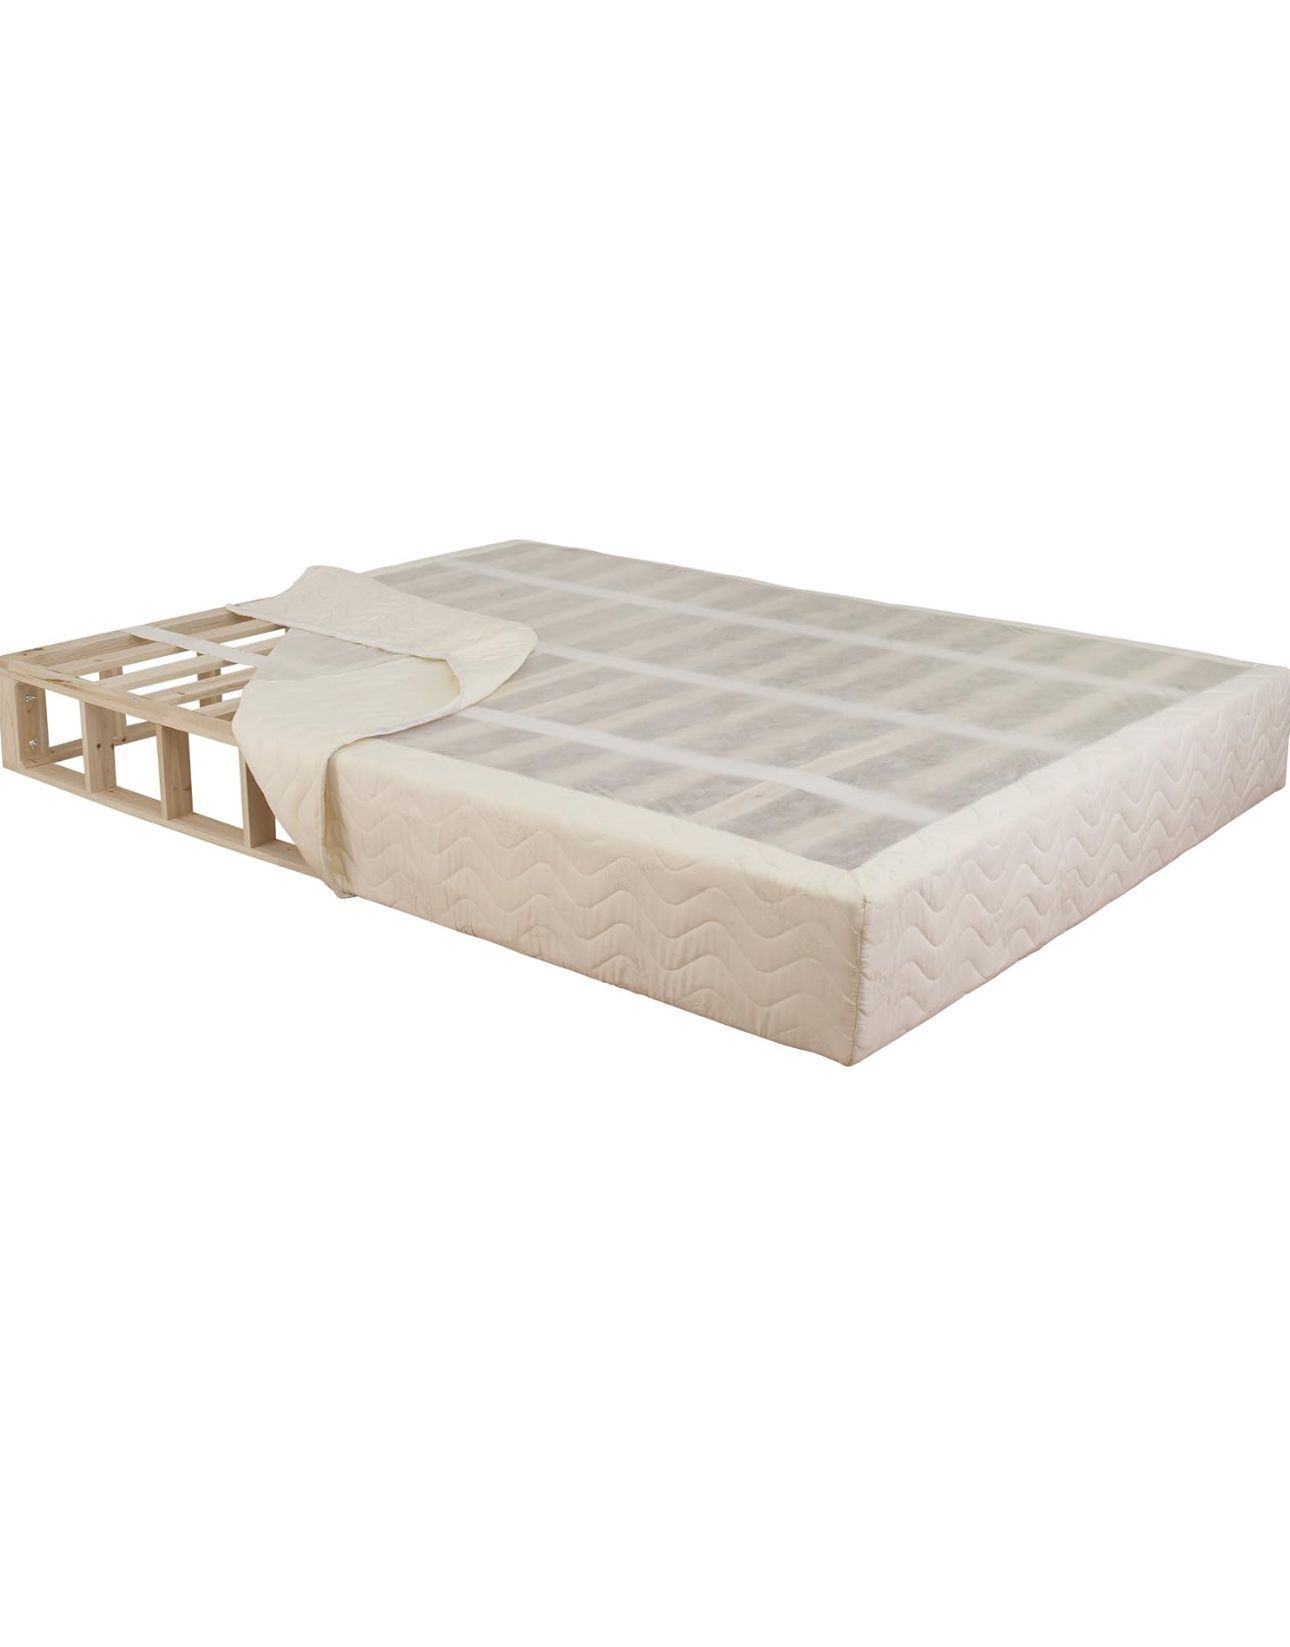 CoutureSleep 9 Inch KD Wooden Foundation - King